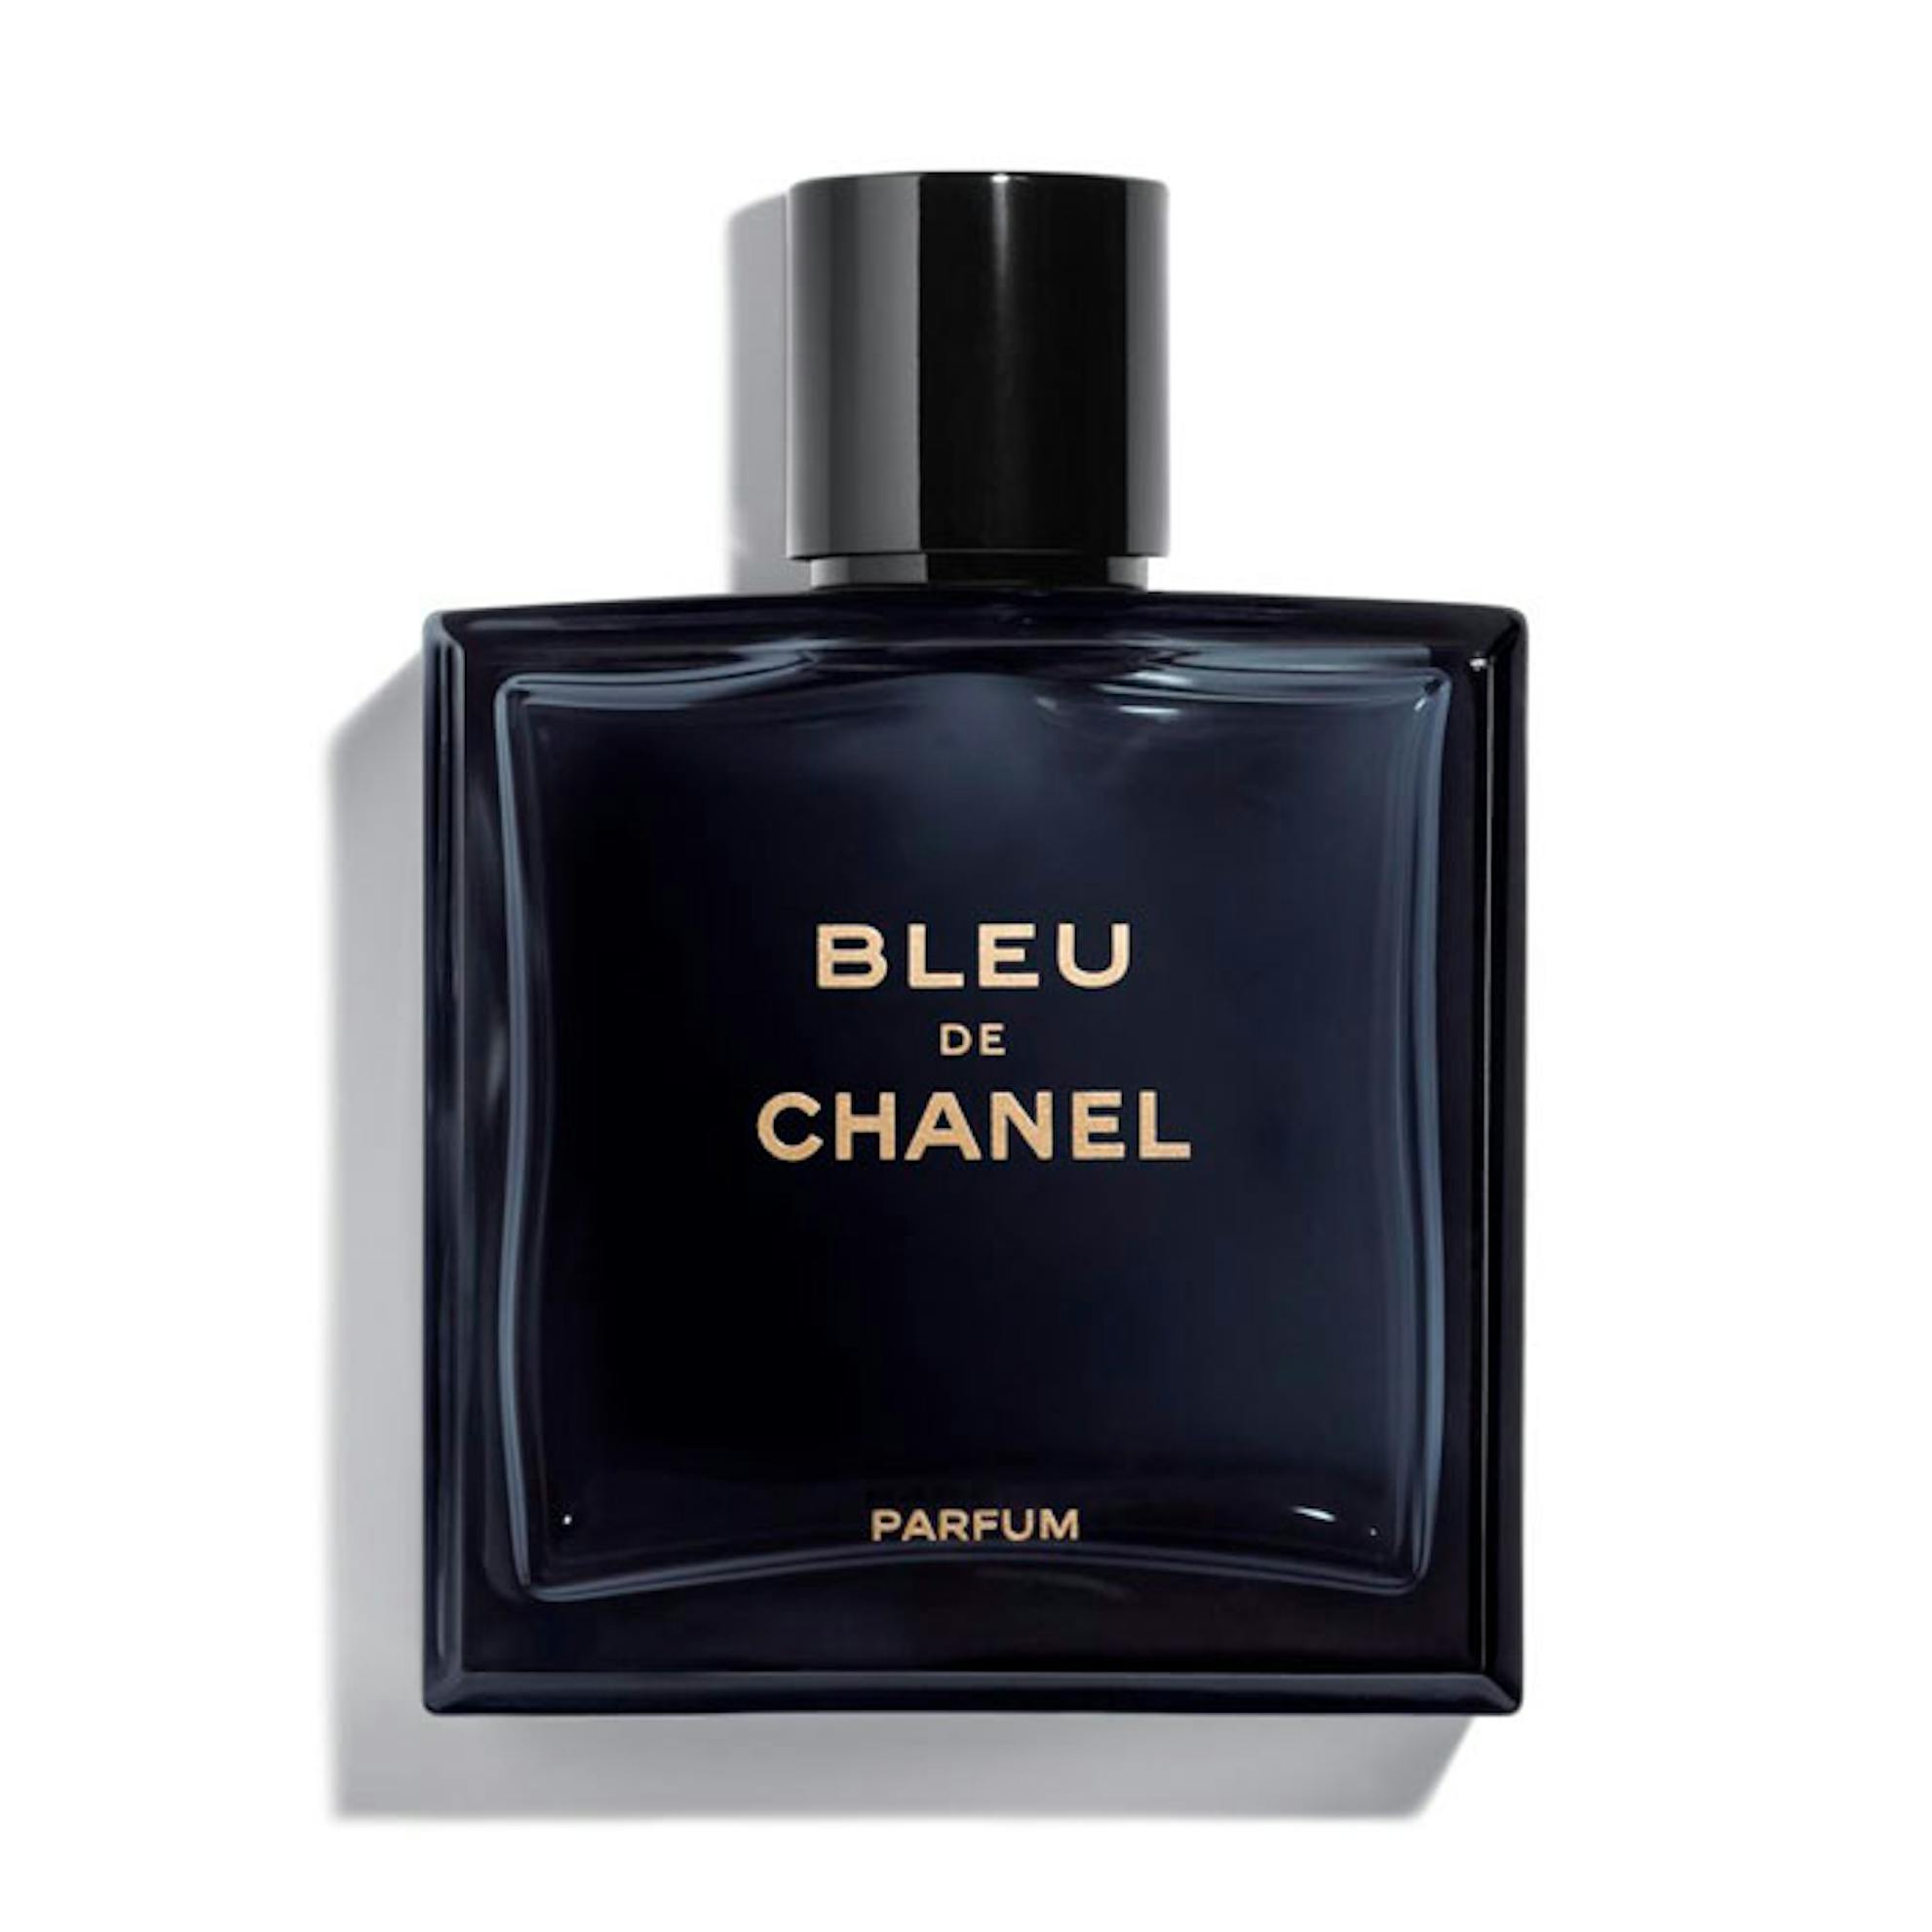 1 Pc / BLEU DE CHANEL MEN PURE FRAGRANCE OIL BY HAVE A SCENT 12 ml ROLL  BALL NEW